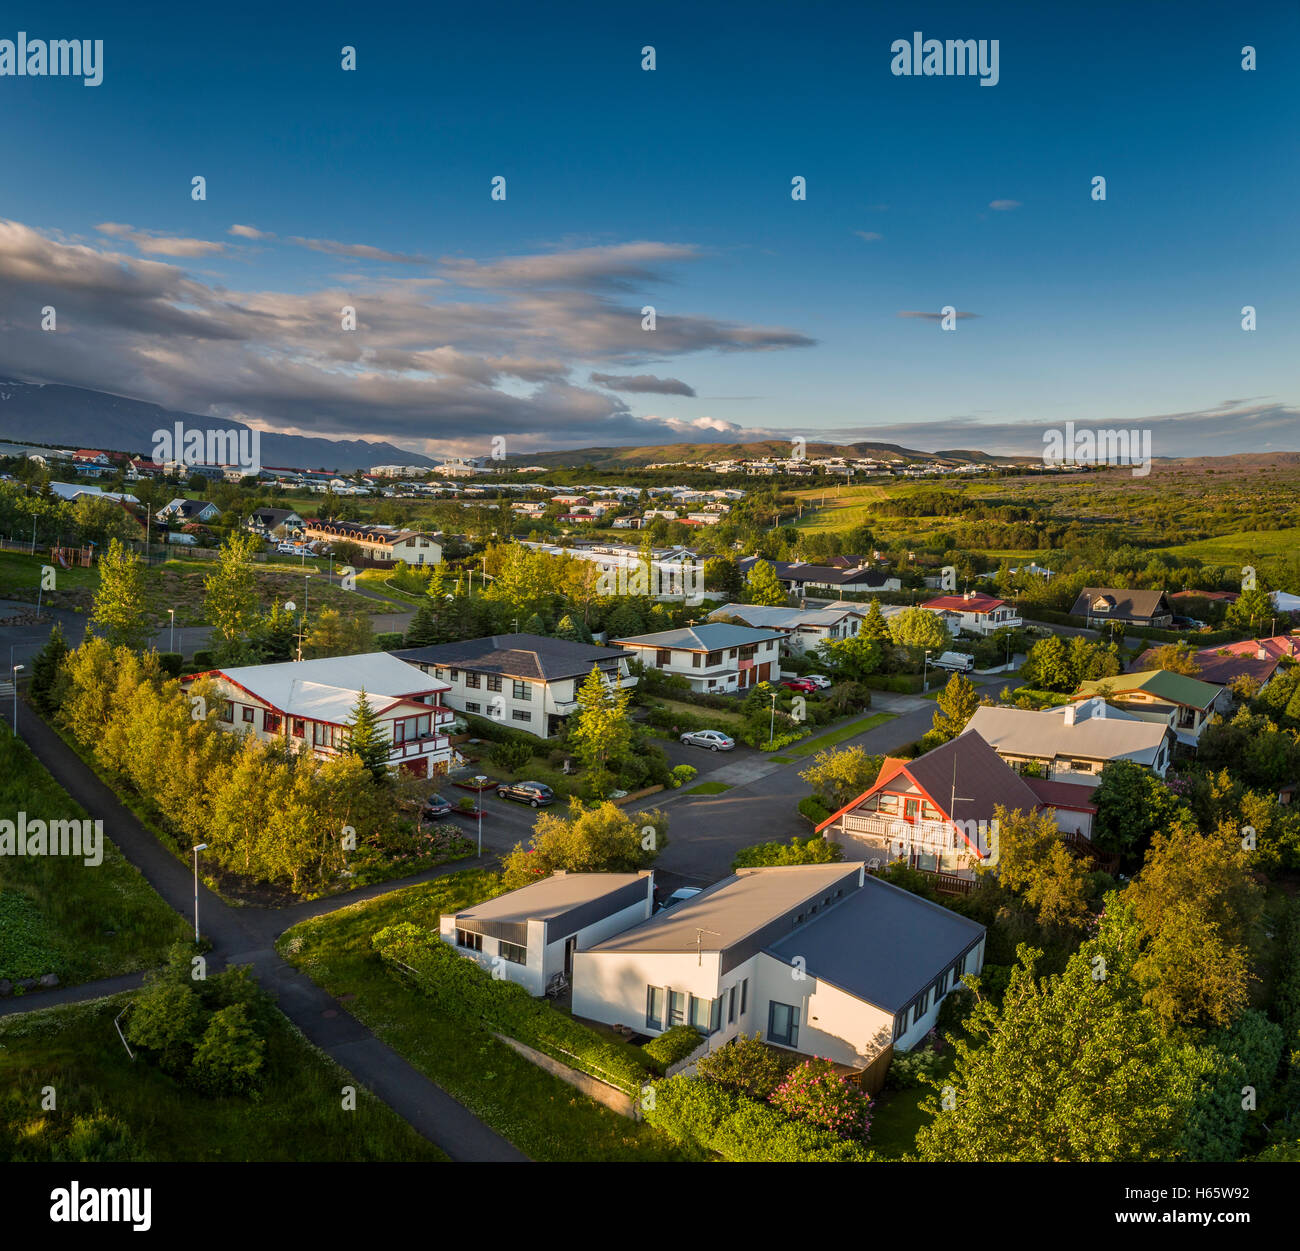 Homes in Grafarvogur, suburb of Reykjavik, Iceland. This image is shot using a drone. Stock Photo